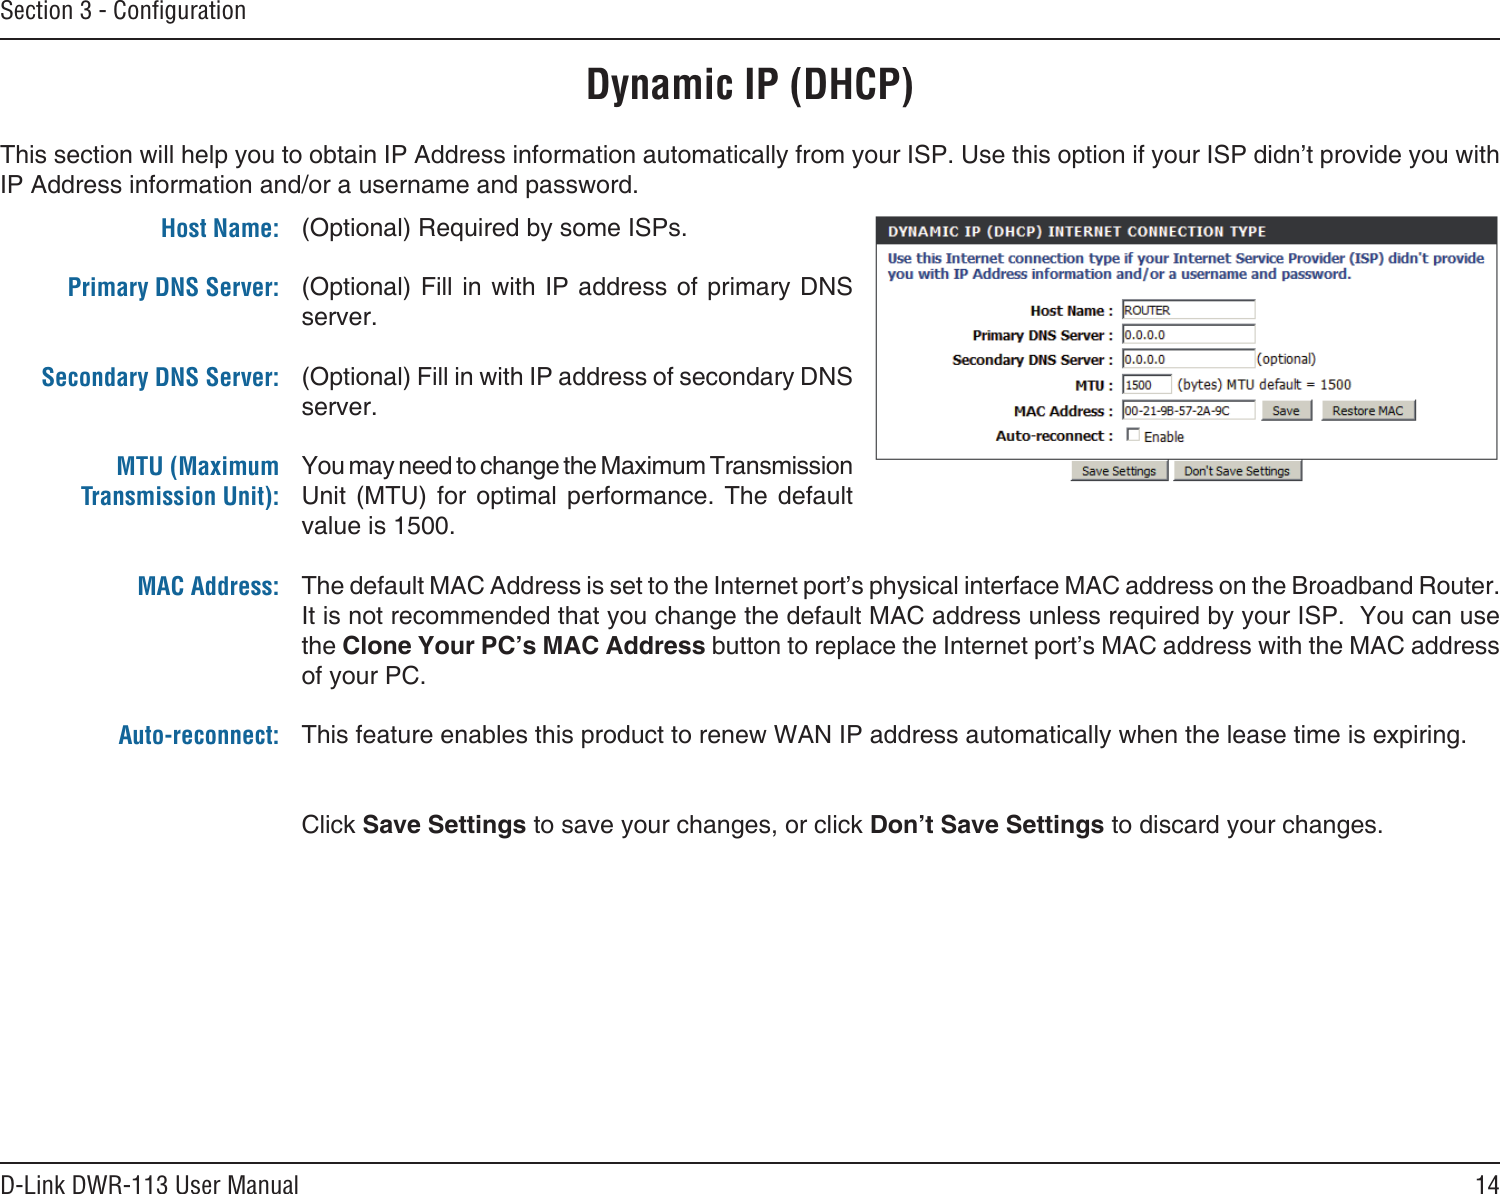 14D-Link DWR-113 User ManualSection 3 - ConﬁgurationDynamic IP (DHCP)(Optional) Required by some ISPs.(Optional) Fill in with IP address of primary DNS server.(Optional) Fill in with IP address of secondary DNS server.You may need to change the Maximum Transmission Unit  (MTU)  for  optimal  performance.  The  default value is 1500.The default MAC Address is set to the Internet port’s physical interface MAC address on the Broadband Router. It is not recommended that you change the default MAC address unless required by your ISP.  You can use the Clone Your PC’s MAC Address button to replace the Internet port’s MAC address with the MAC address of your PC.This feature enables this product to renew WAN IP address automatically when the lease time is expiring. Click Save Settings to save your changes, or click Don’t Save Settings to discard your changes.This section will help you to obtain IP Address information automatically from your ISP. Use this option if your ISP didn’t provide you with IP Address information and/or a username and password.Host Name:Primary DNS Server: Secondary DNS Server: MTU (Maximum Transmission Unit): MAC Address: Auto-reconnect: